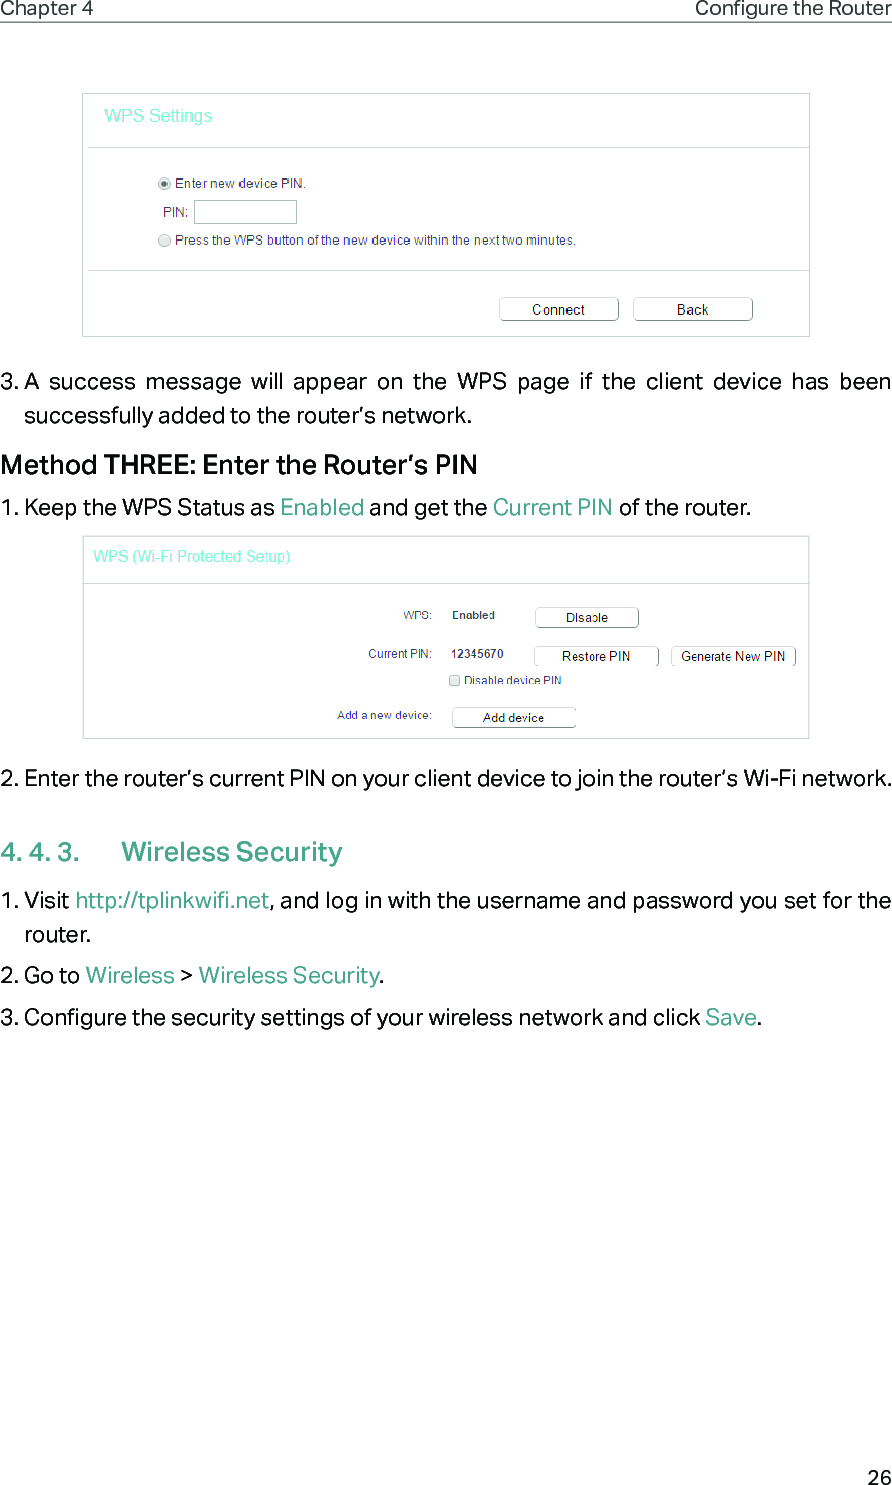 26Chapter 4 Congure the Router 3. A success message will appear on the WPS page if the client device has been successfully added to the router’s network.Method THREE: Enter the Router’s PIN1. Keep the WPS Status as Enabled and get the Current PIN of the router.2. Enter the router’s current PIN on your client device to join the router’s Wi-Fi network.4. 4. 3.  Wireless Security1. Visit http://tplinkwifi.net, and log in with the username and password you set for the router.2. Go to Wireless &gt; Wireless Security. 3. Configure the security settings of your wireless network and click Save.